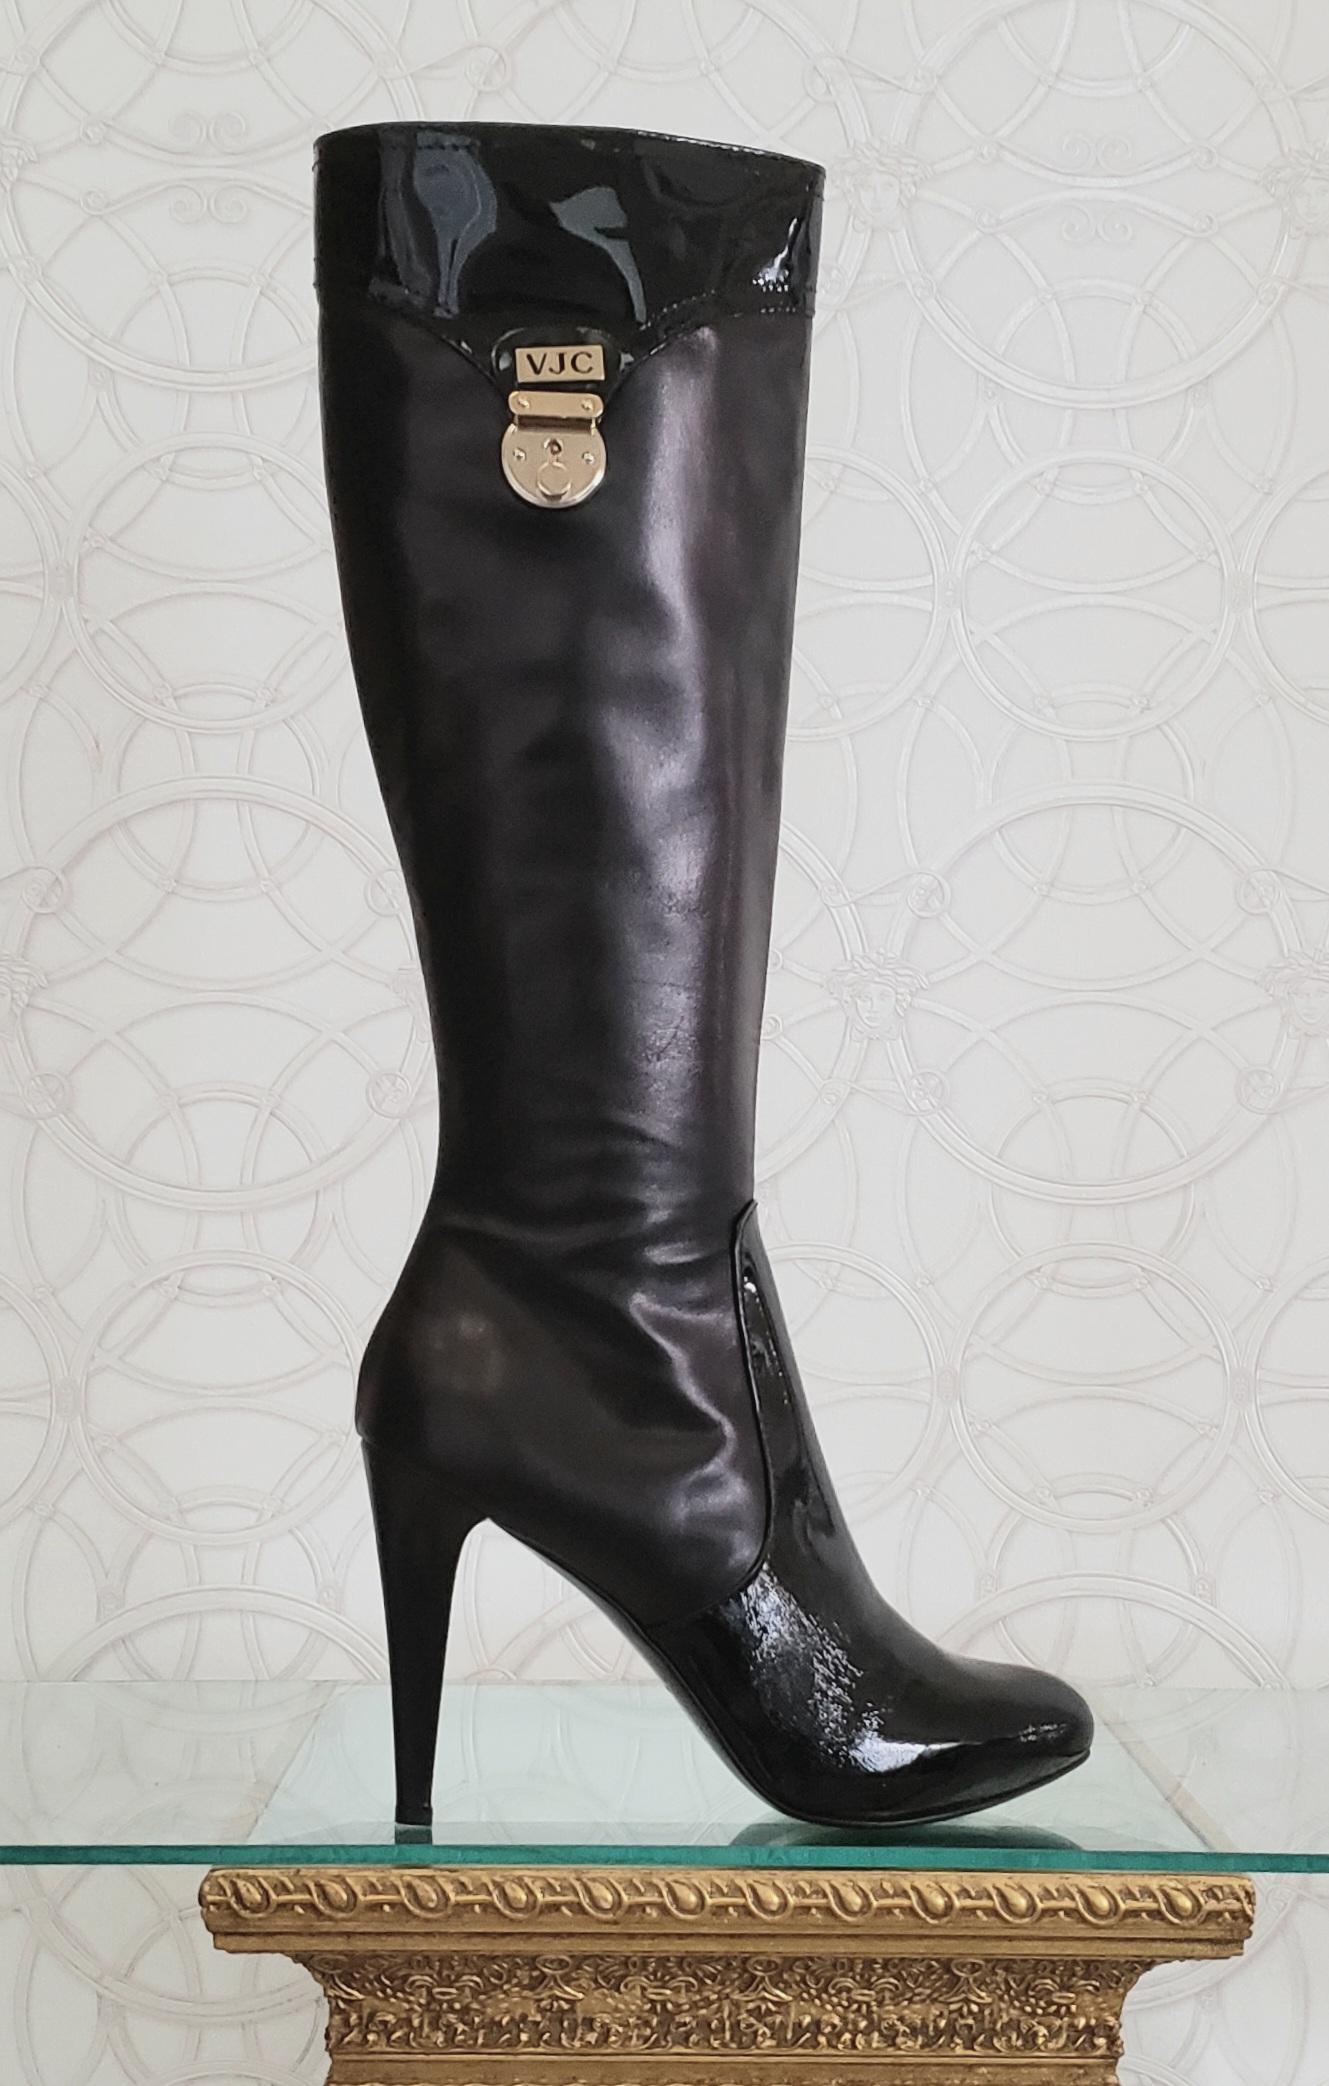 VERSACE VJC BOOTS



Black leather boots with Patent leather inserts

Gold hardware




Content: 
100% Leather, patent leather

lining: Smooth 100% gold leather 

Heel height: 4 1/2